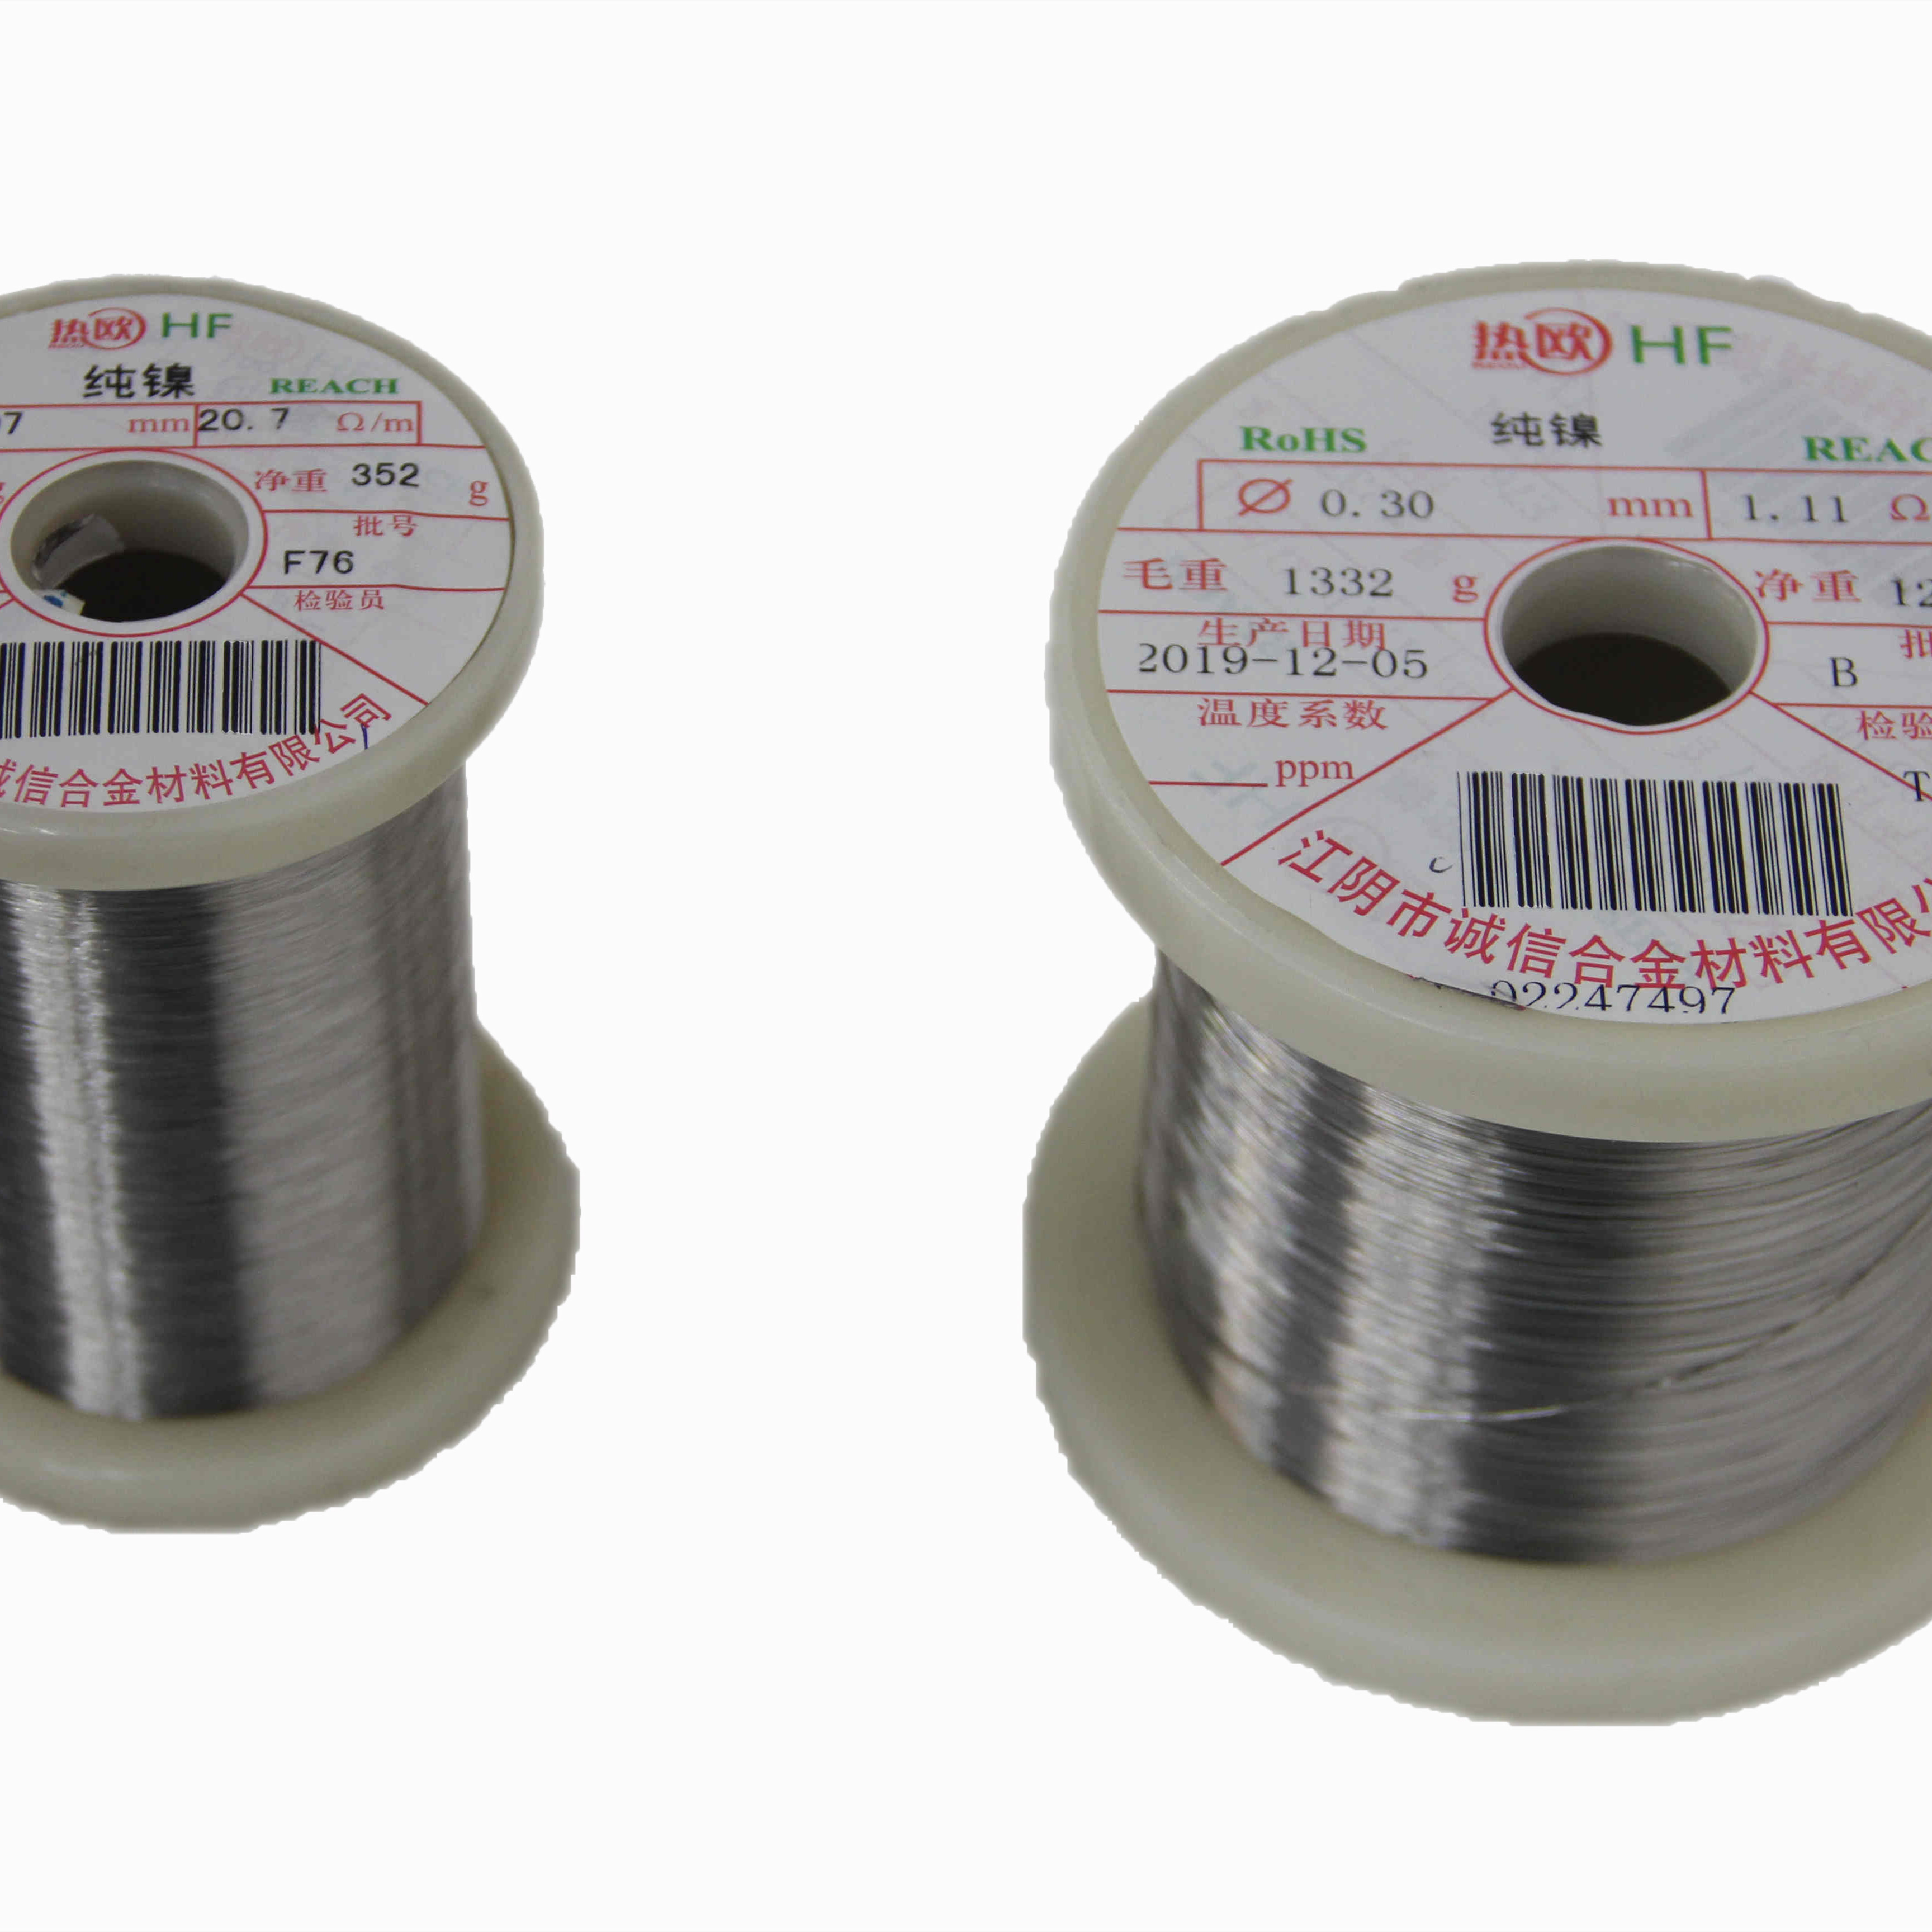 Nickel201 Pure Nickel wires has a very low work hardening rate 